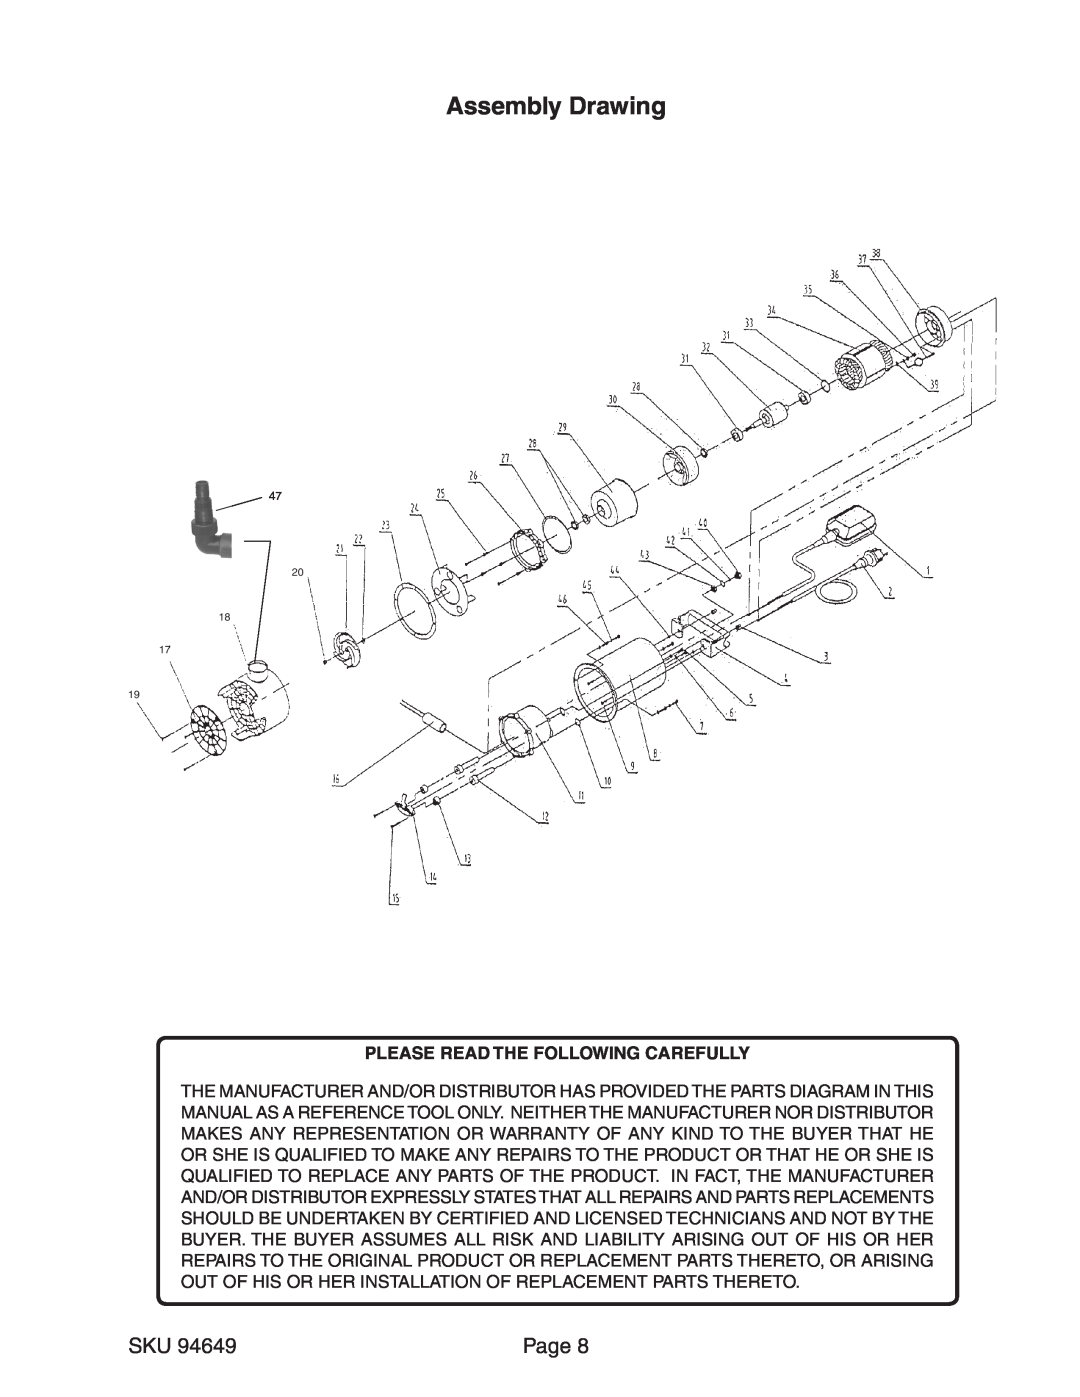 Chicago Electric 94649 operating instructions Assembly Drawing, Page, Please Read The Following Carefully 